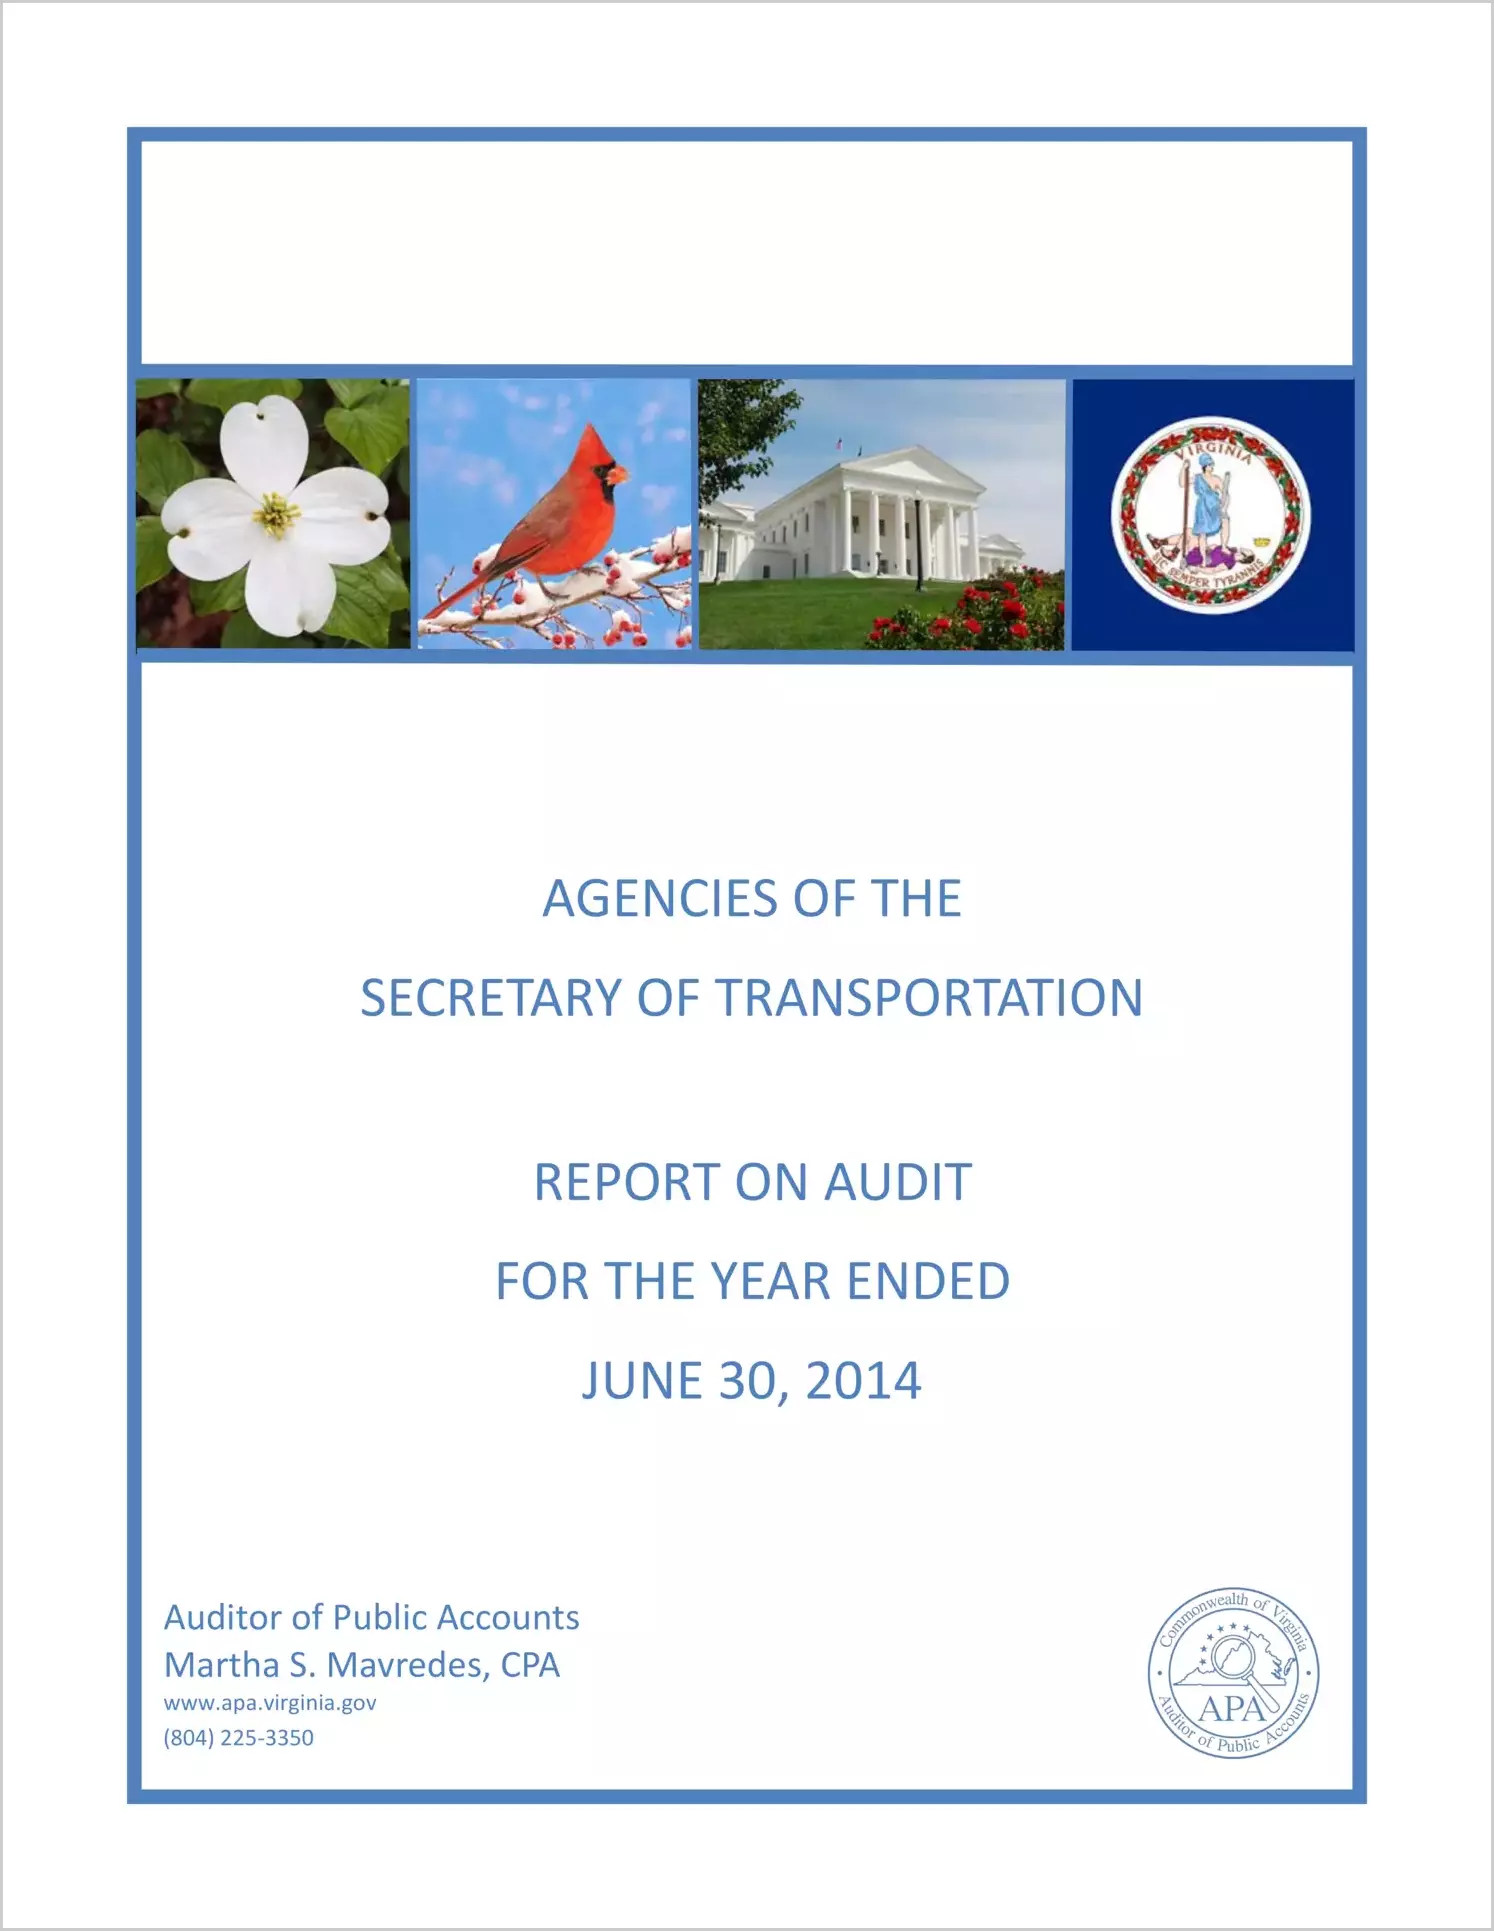 Agencies of the Secretary of Transportation for the year ended June 30, 2014